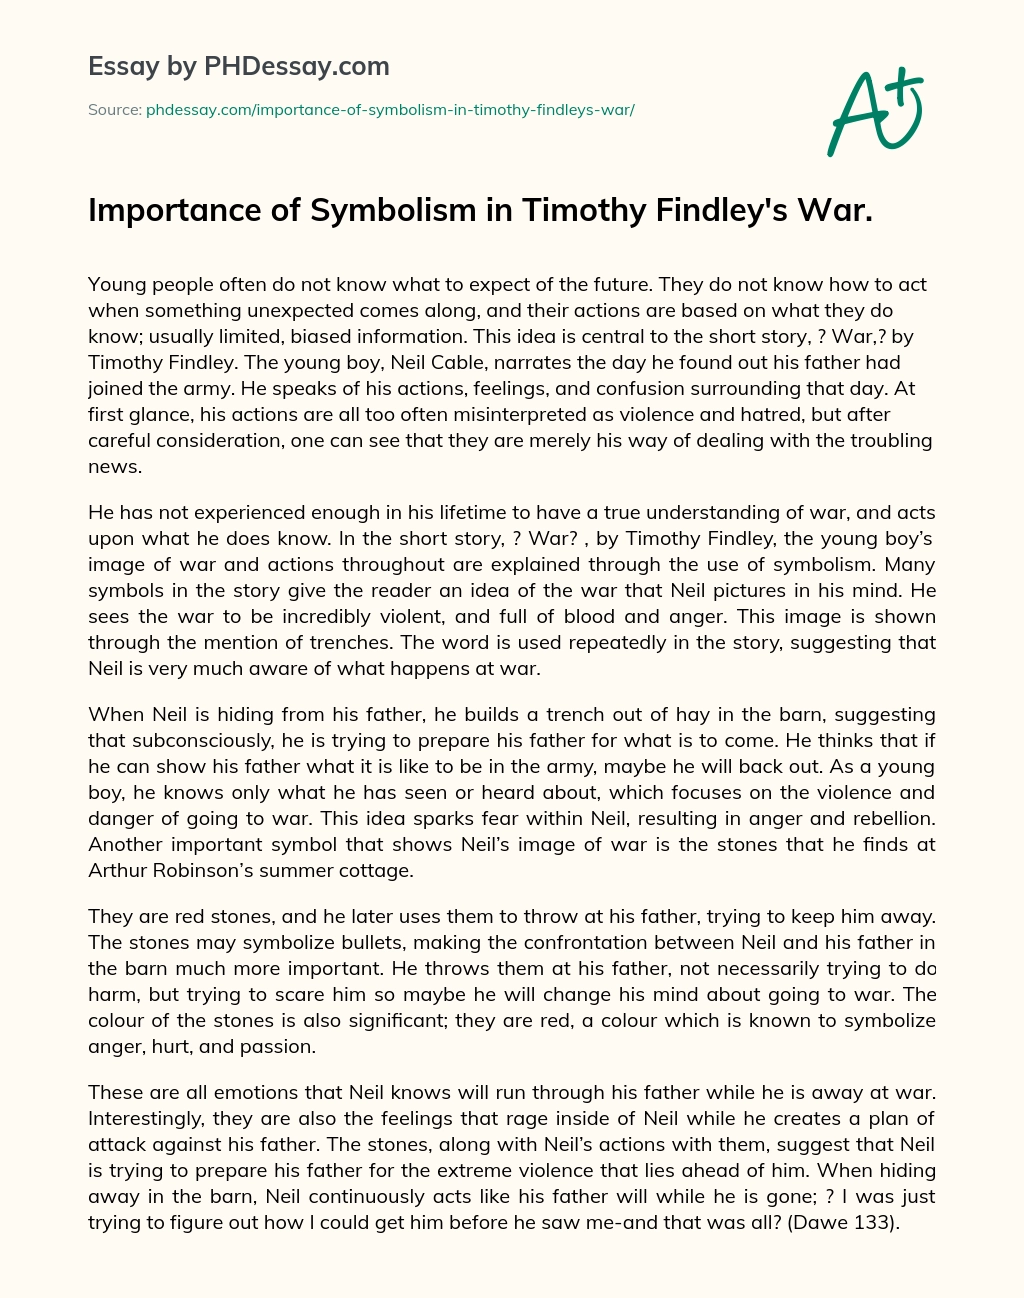 Importance of Symbolism in Timothy Findley’s War. essay